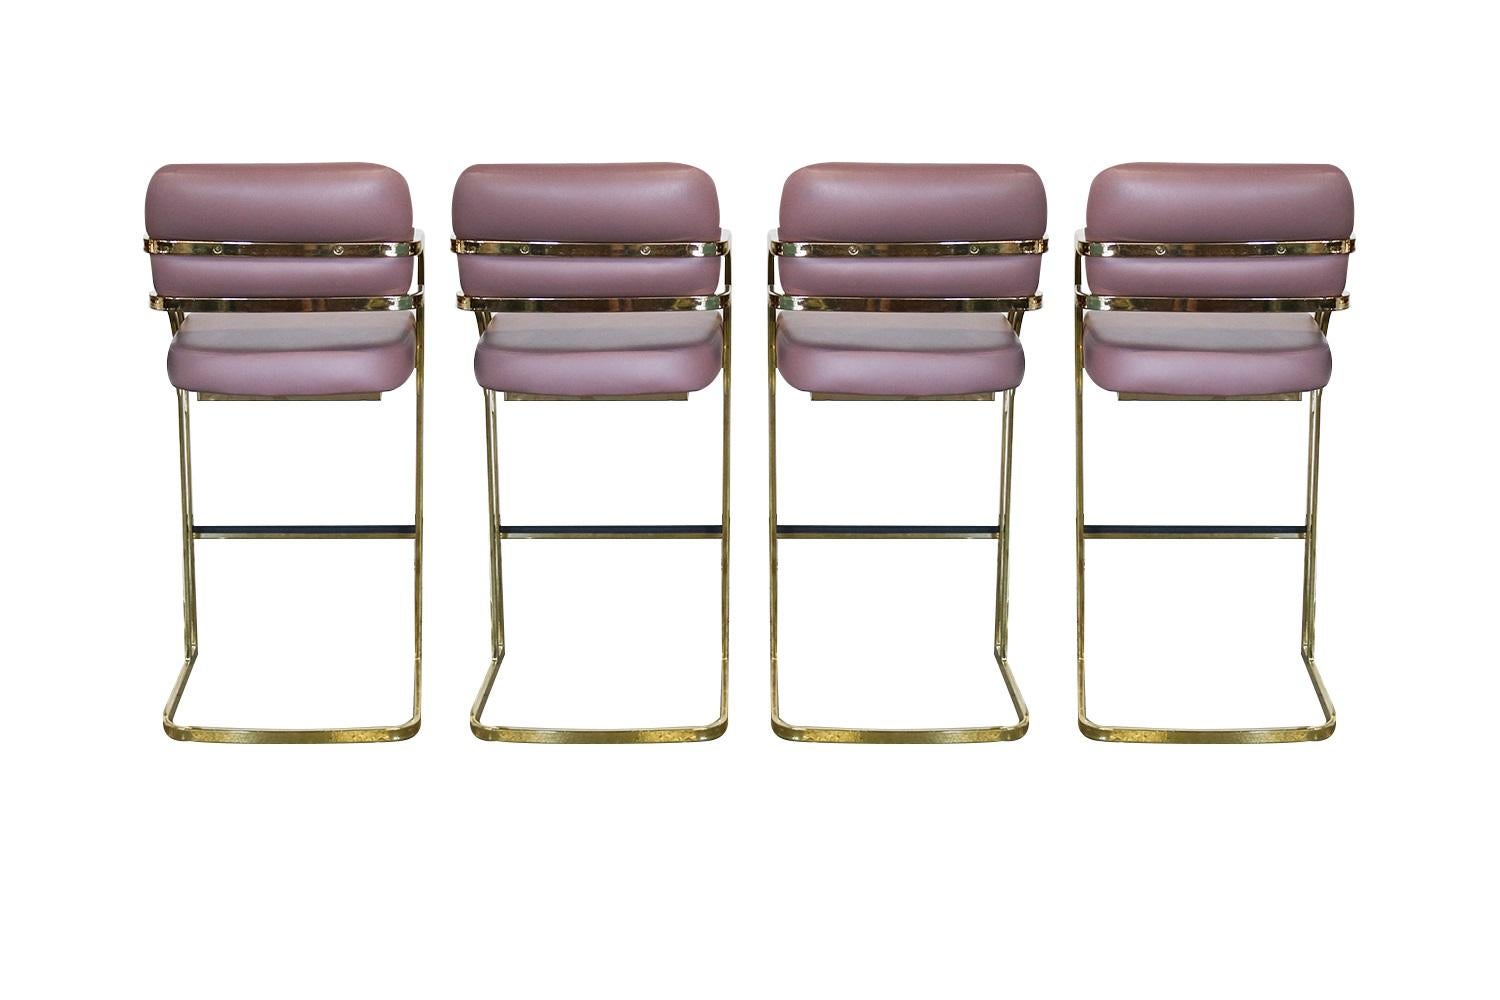 Plated Midcentury Gold Brass Flat Bar Cantilever Stools by Arthur Umanoff